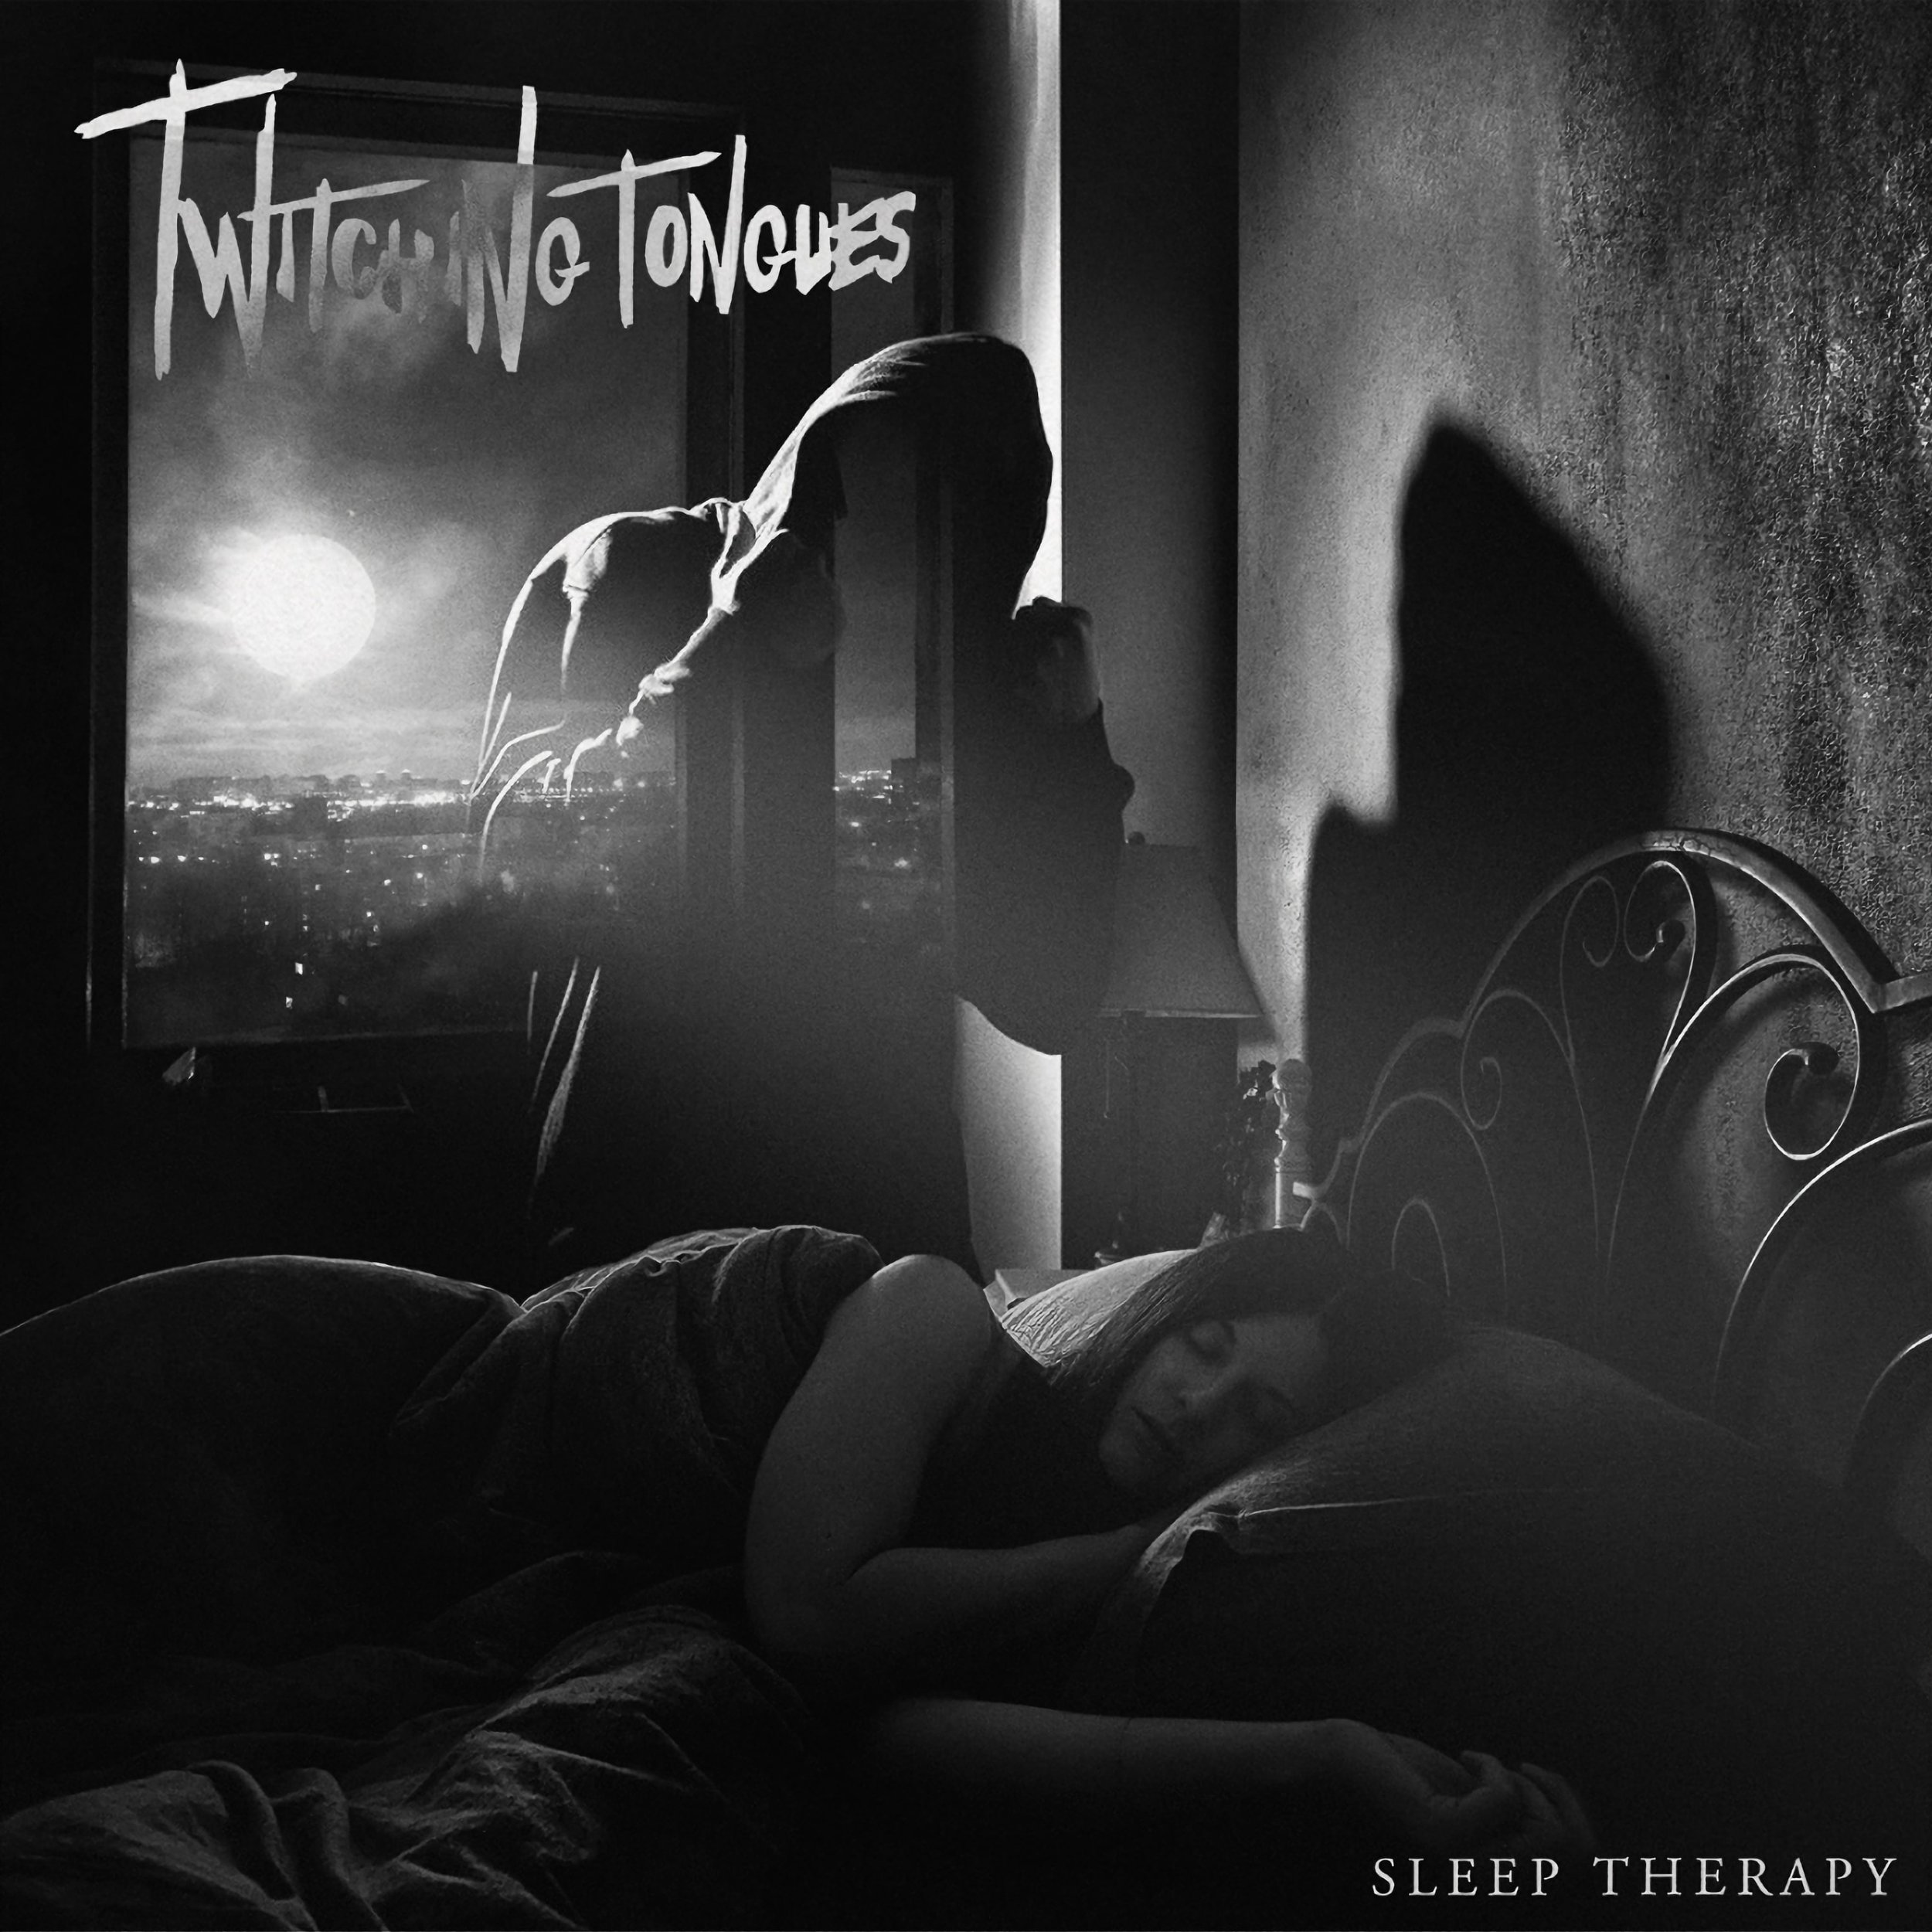 Twitching Tongues - Sleep Therapy - Cover.jpg